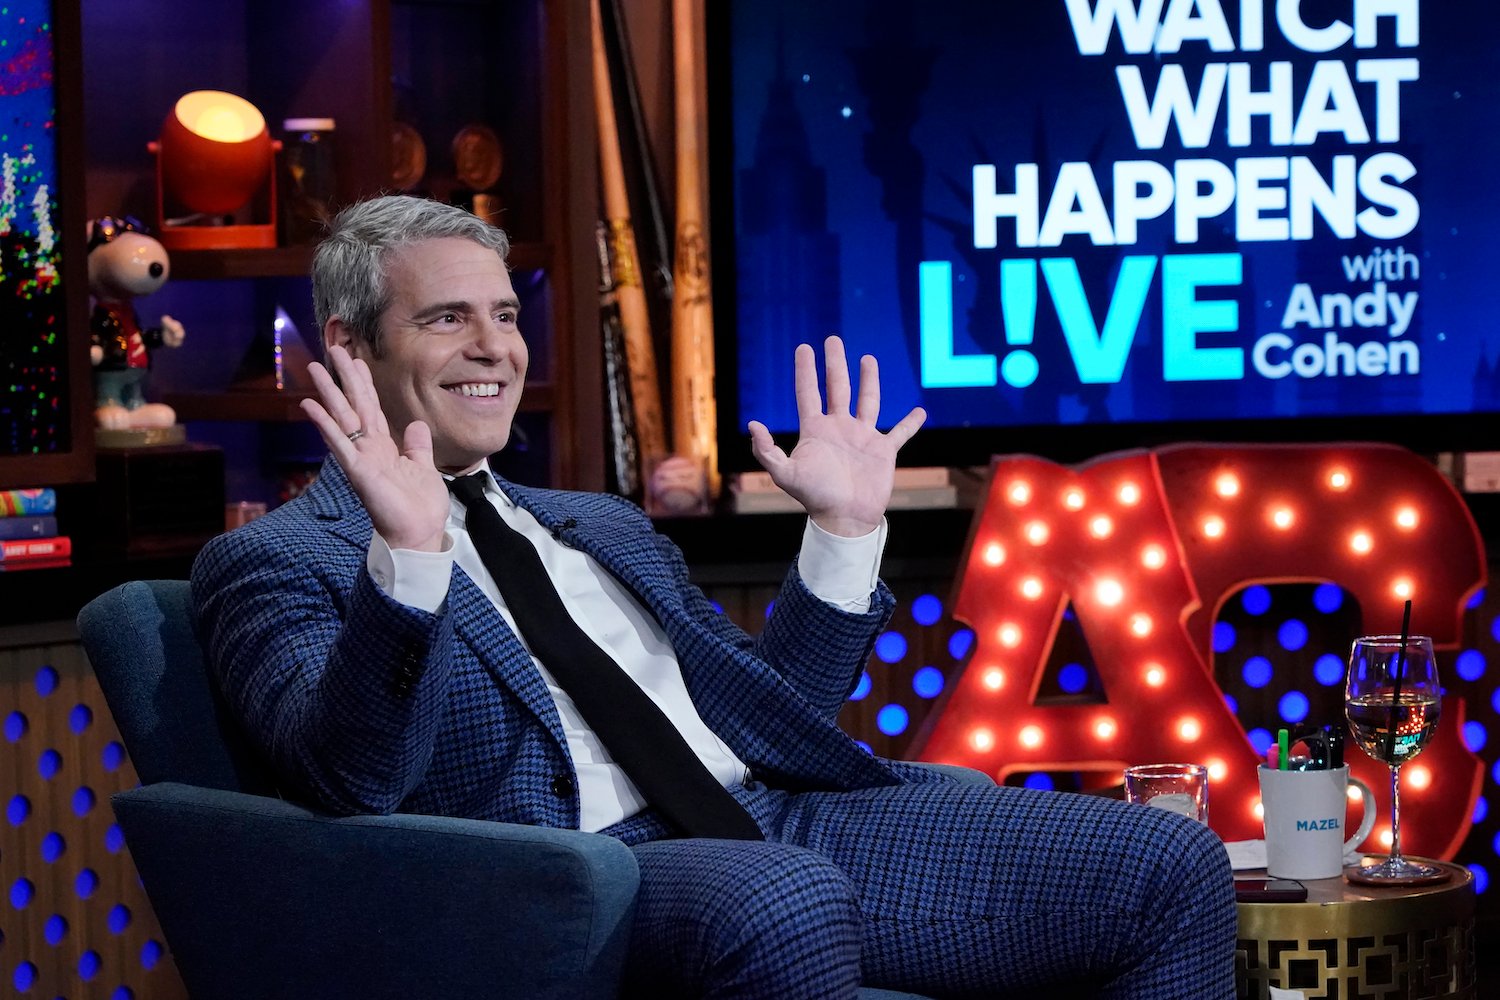 Andy Cohen sitting on the set of 'Watch What Happens Live', smiling, and holding up both of his arms